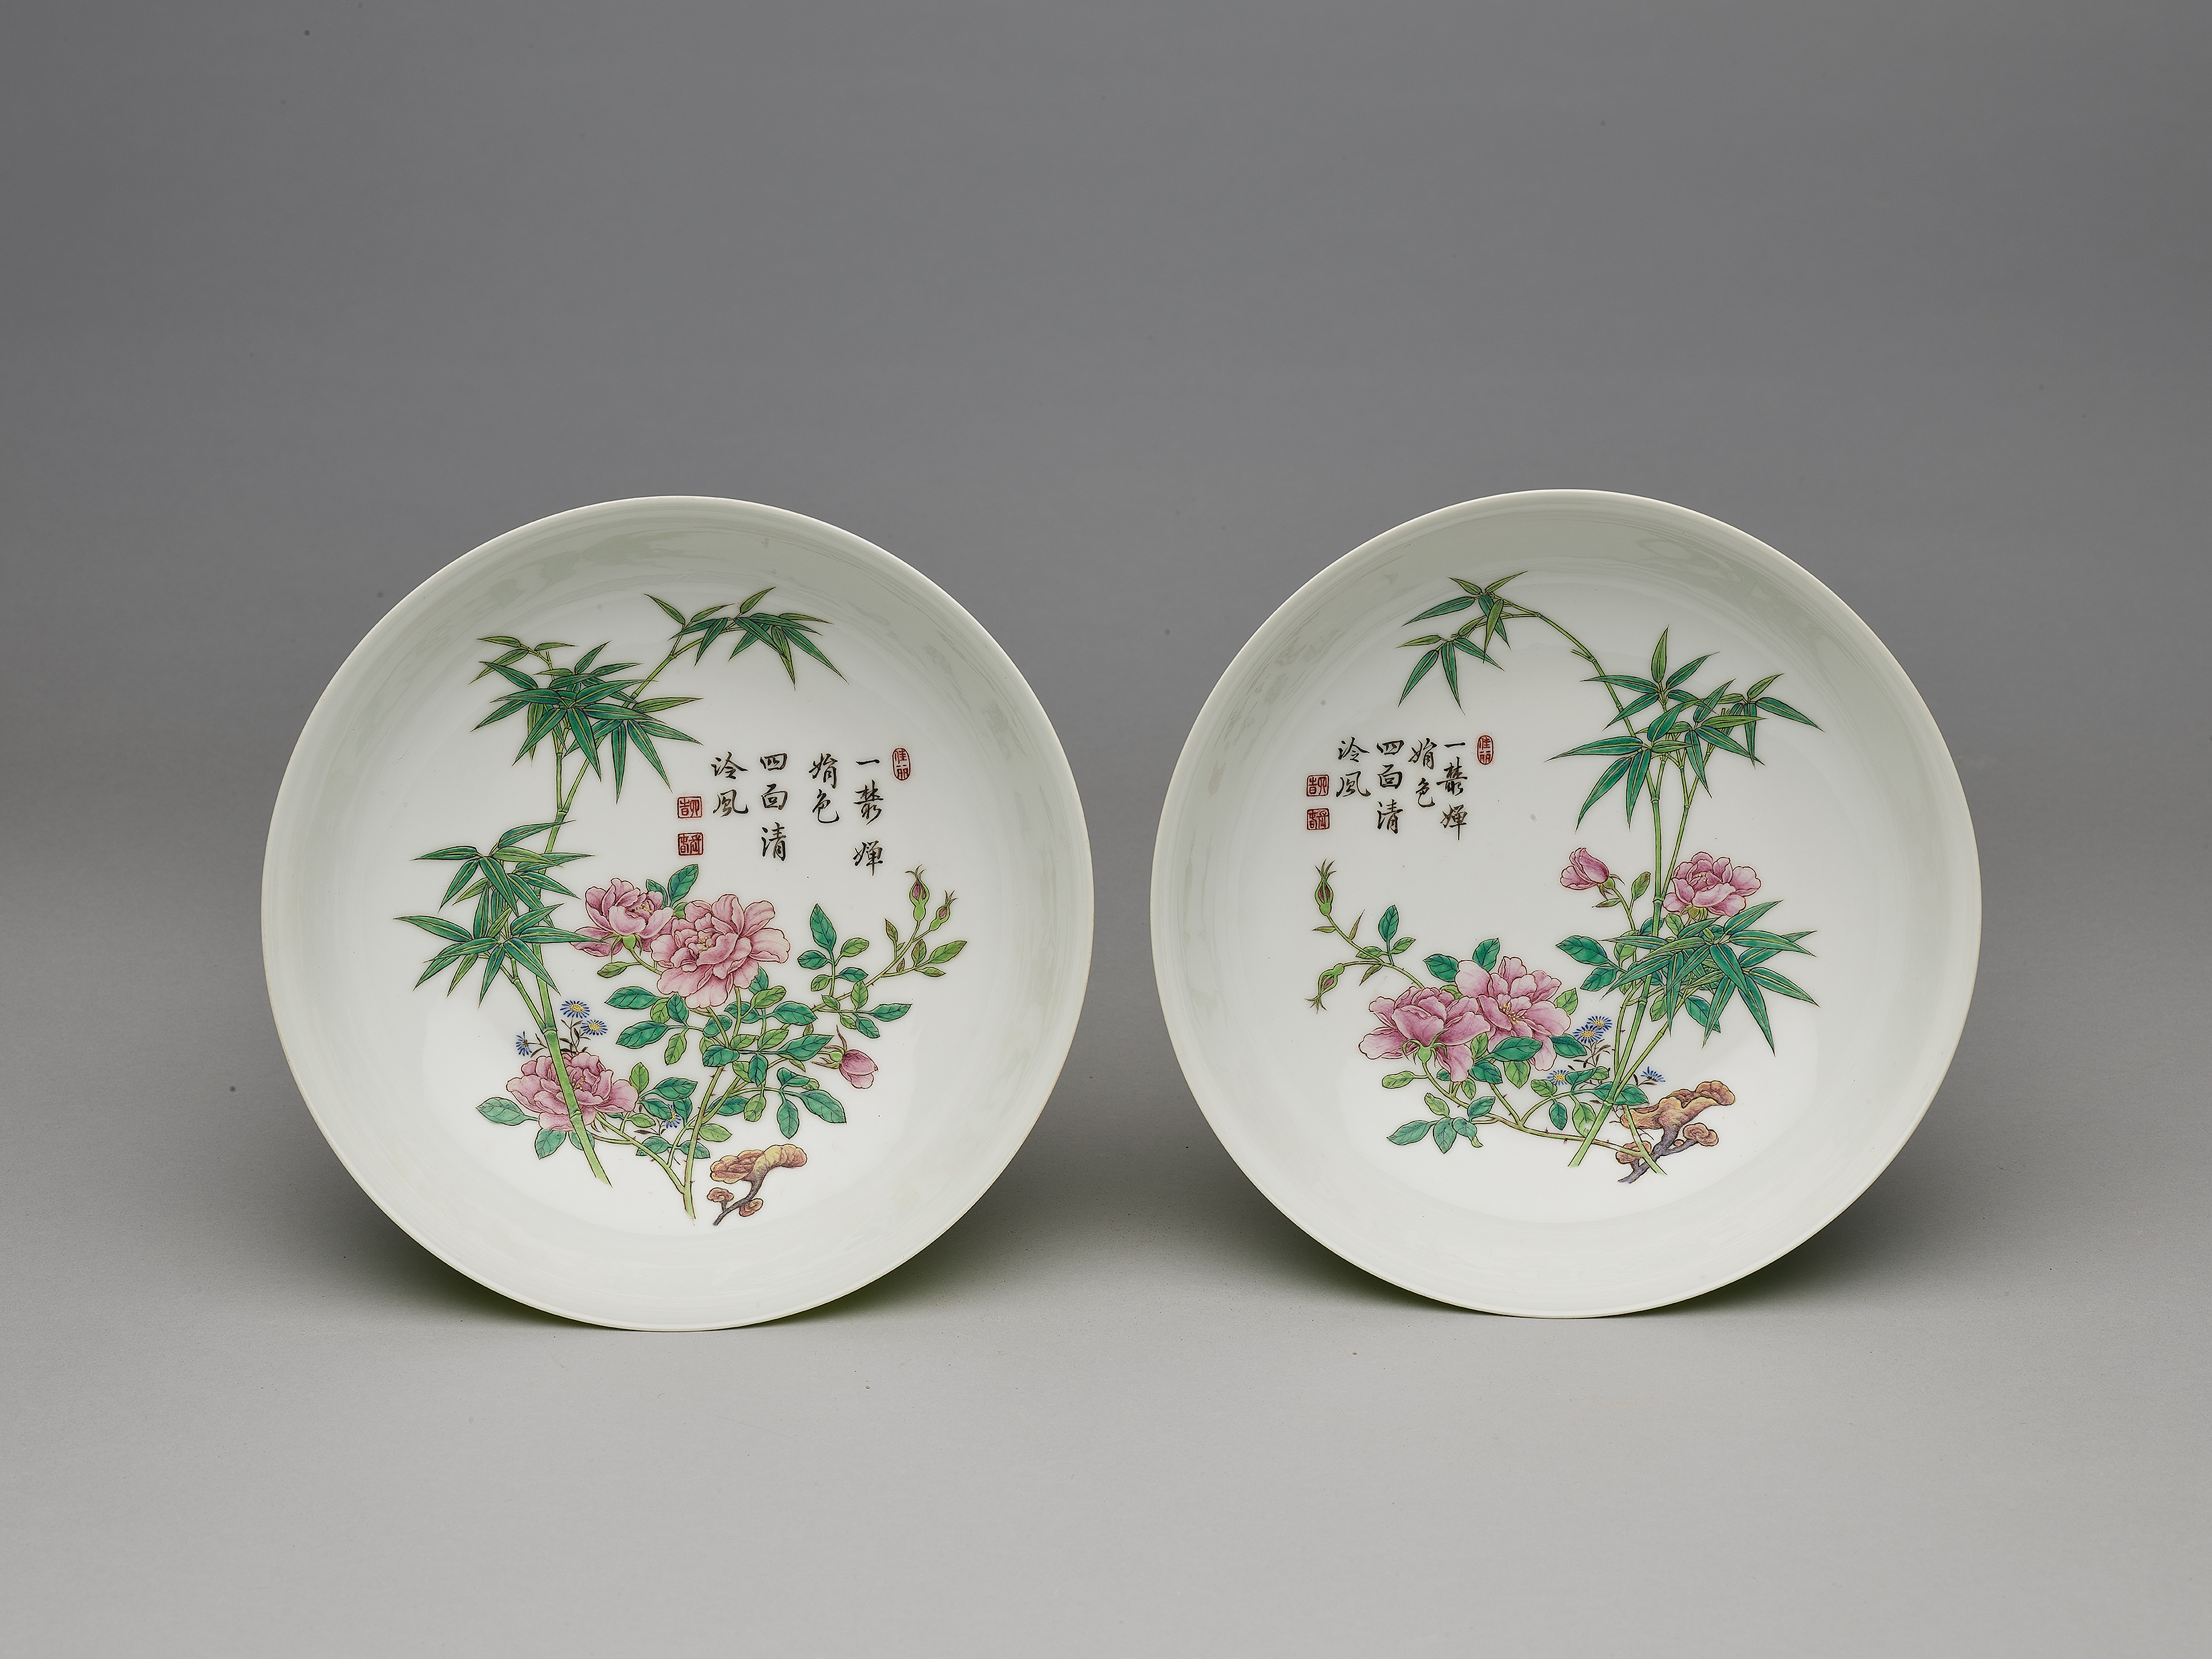 Dish with flower and bamboo inside a carved green exterior in falangcai painted enamels